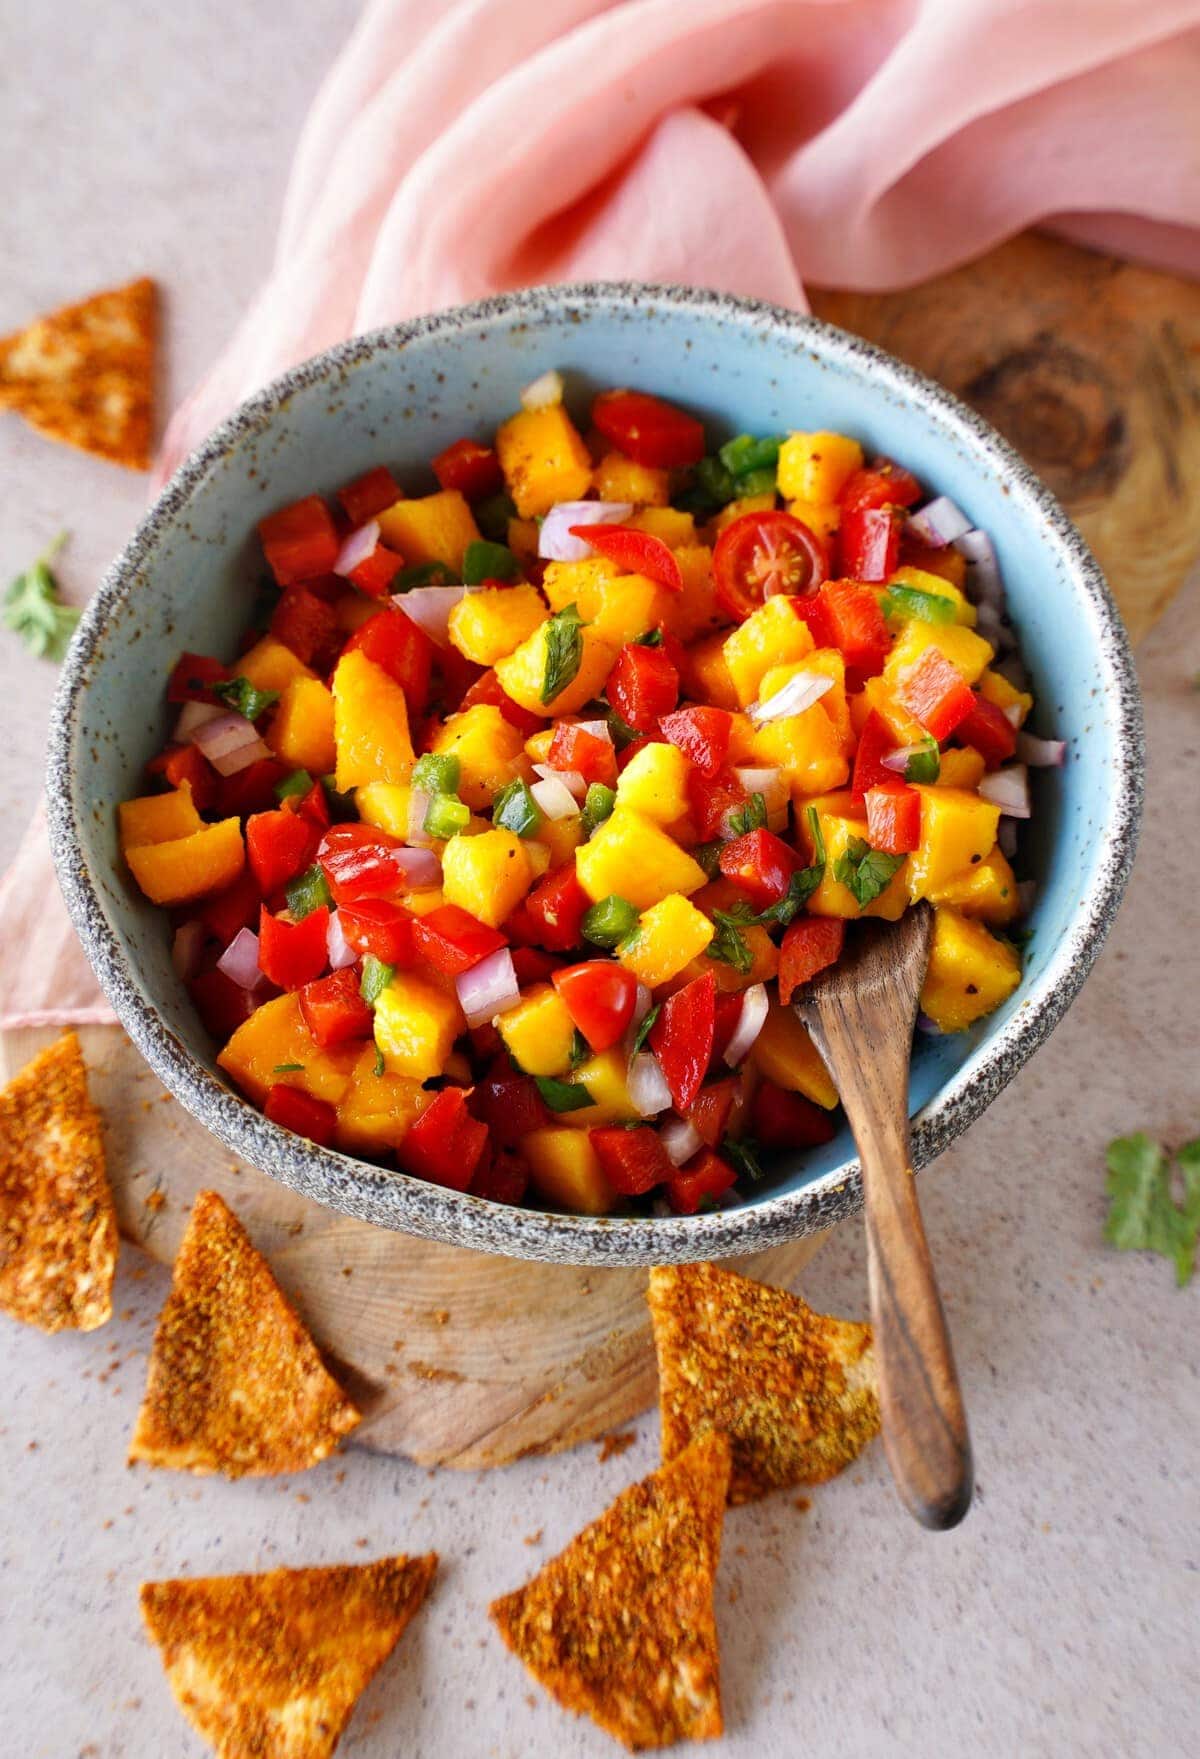 pico de gallo in bowl with wooden spoon and tortilla chips on the side